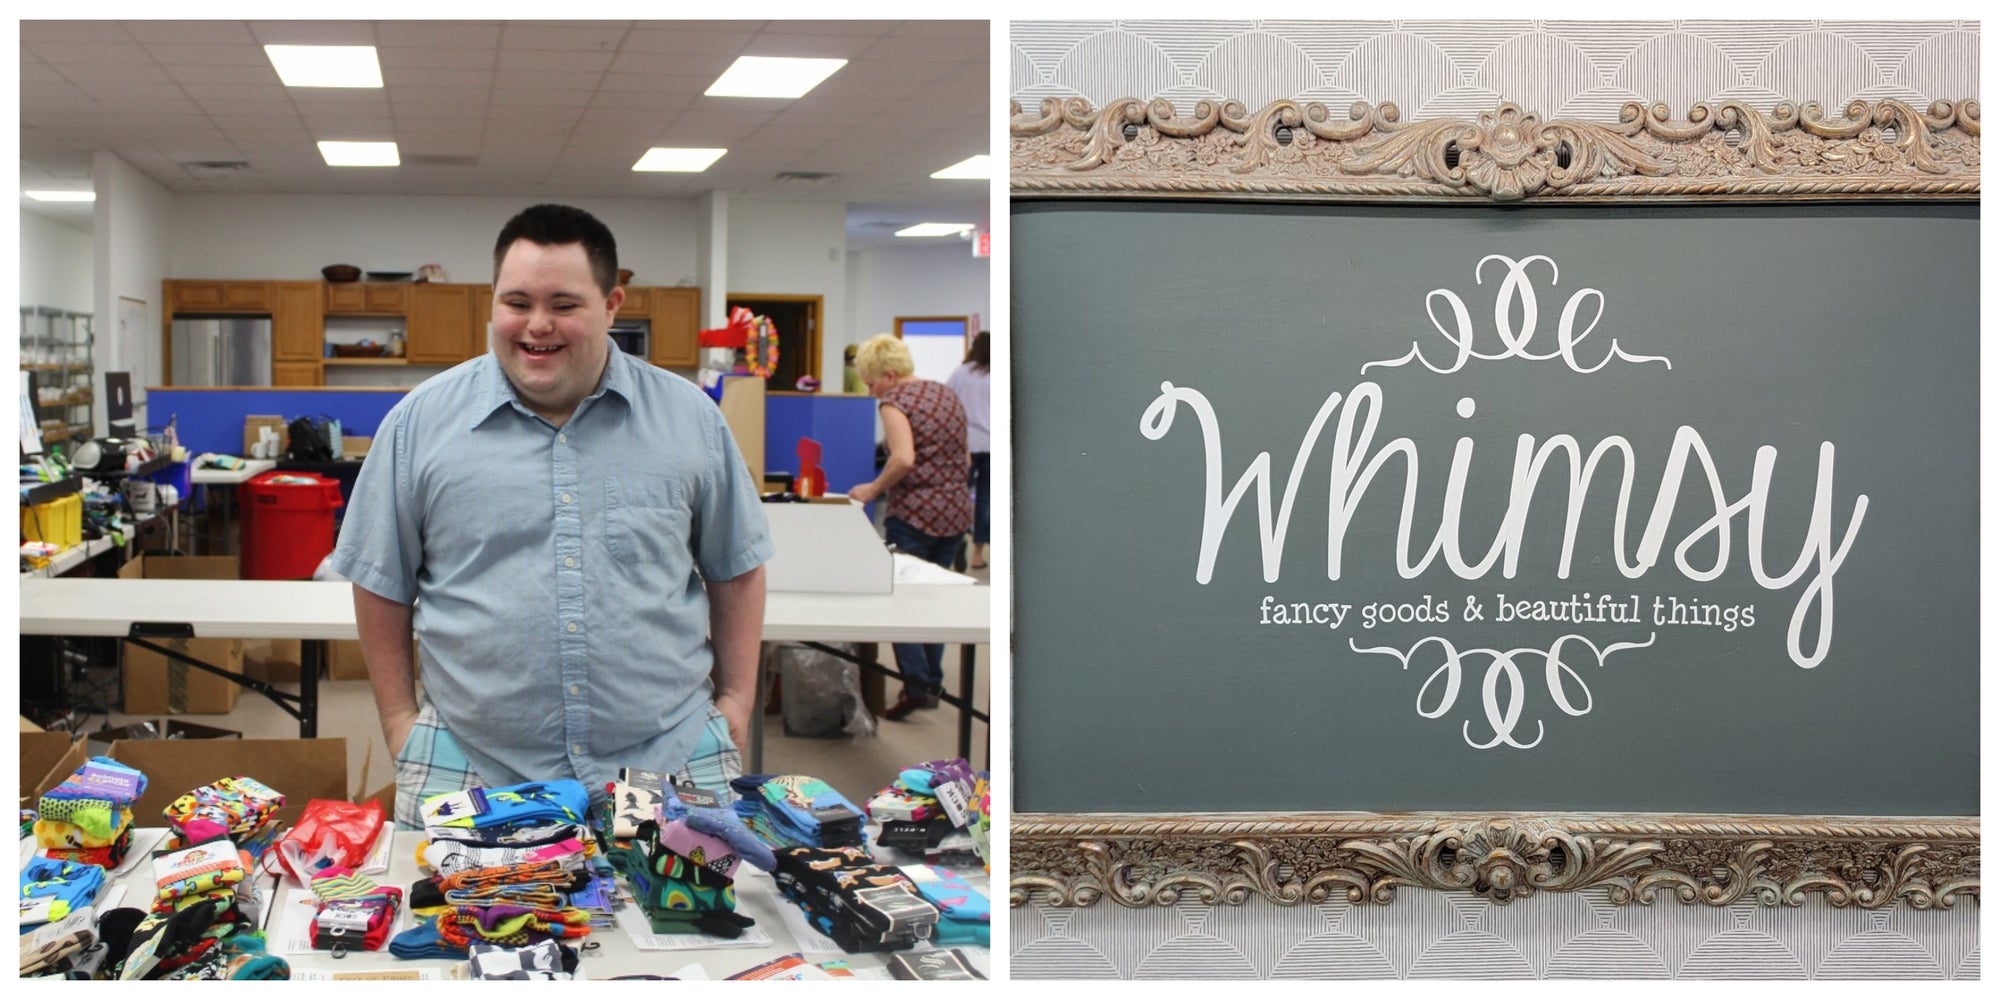 John’s Crazy Socks Can Now Be Found at Whimsy in Ponca City, Oklahoma